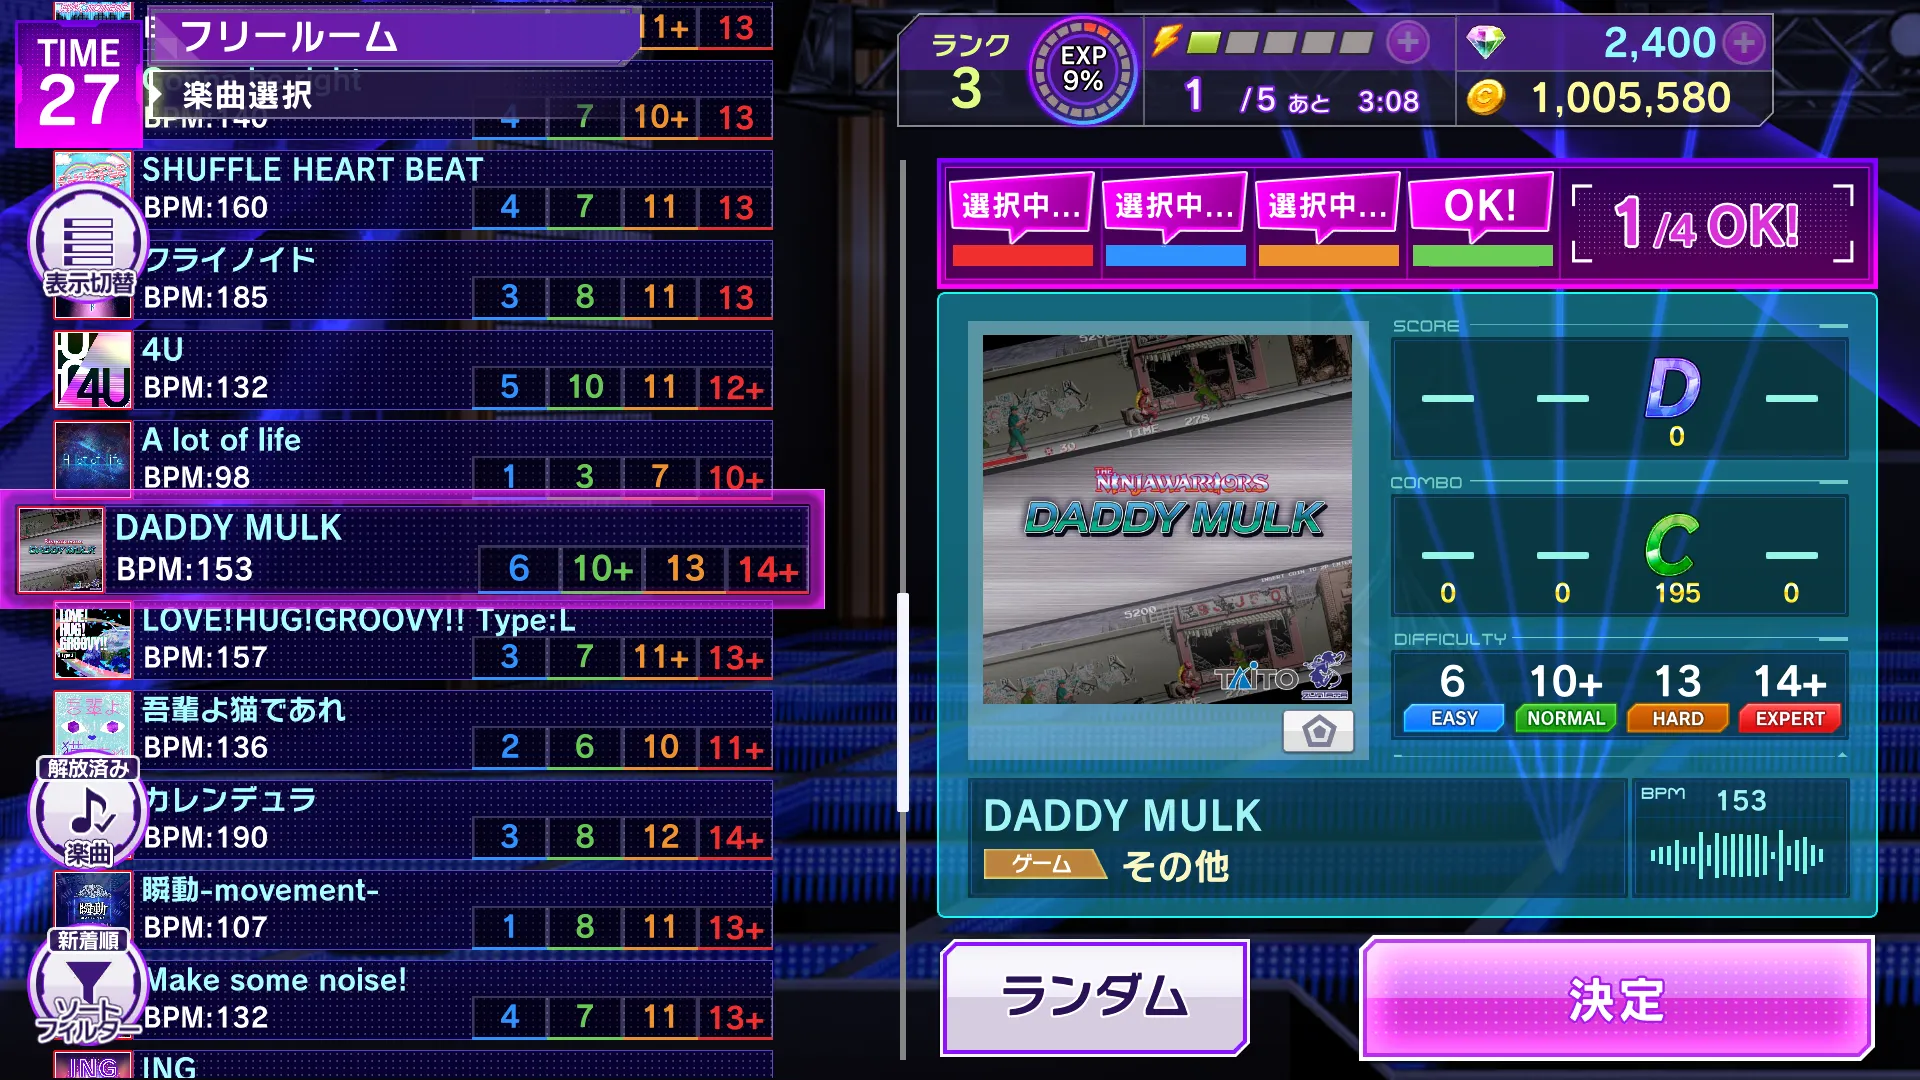 Multi live song selection screen